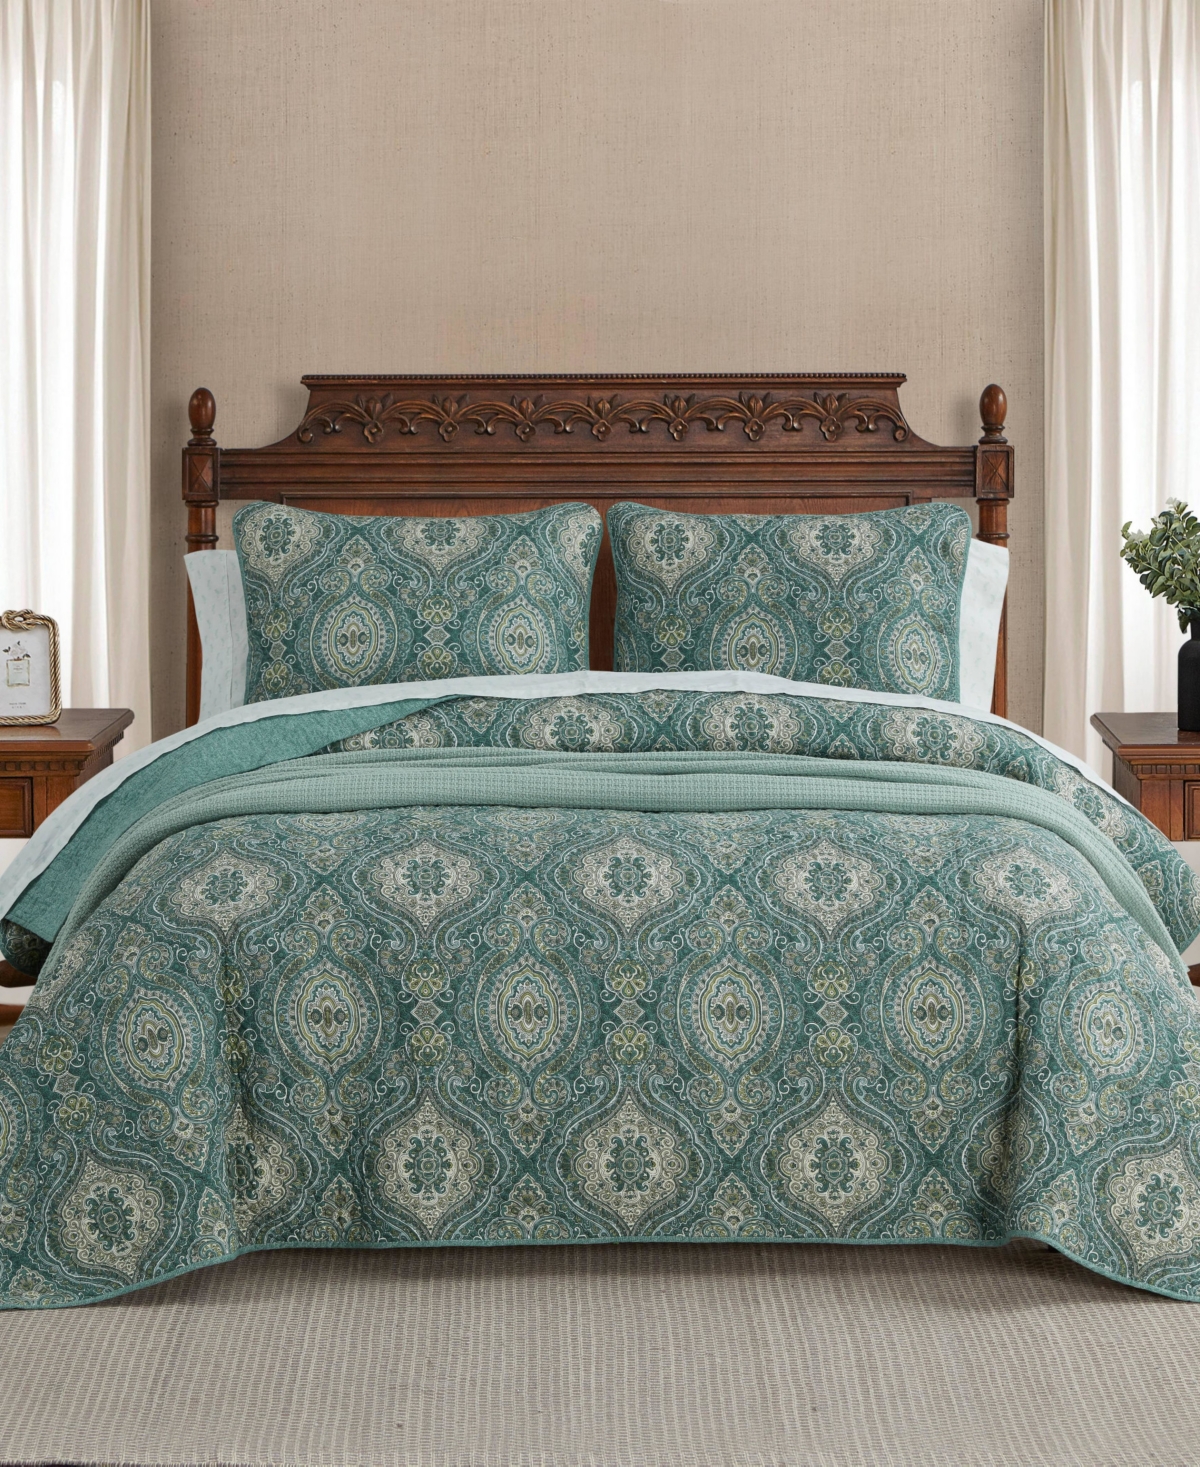 TOMMY BAHAMA HOME TURTLE COVE REVERSIBLE 3 PIECE QUILT SET, FULL/QUEEN BEDDING